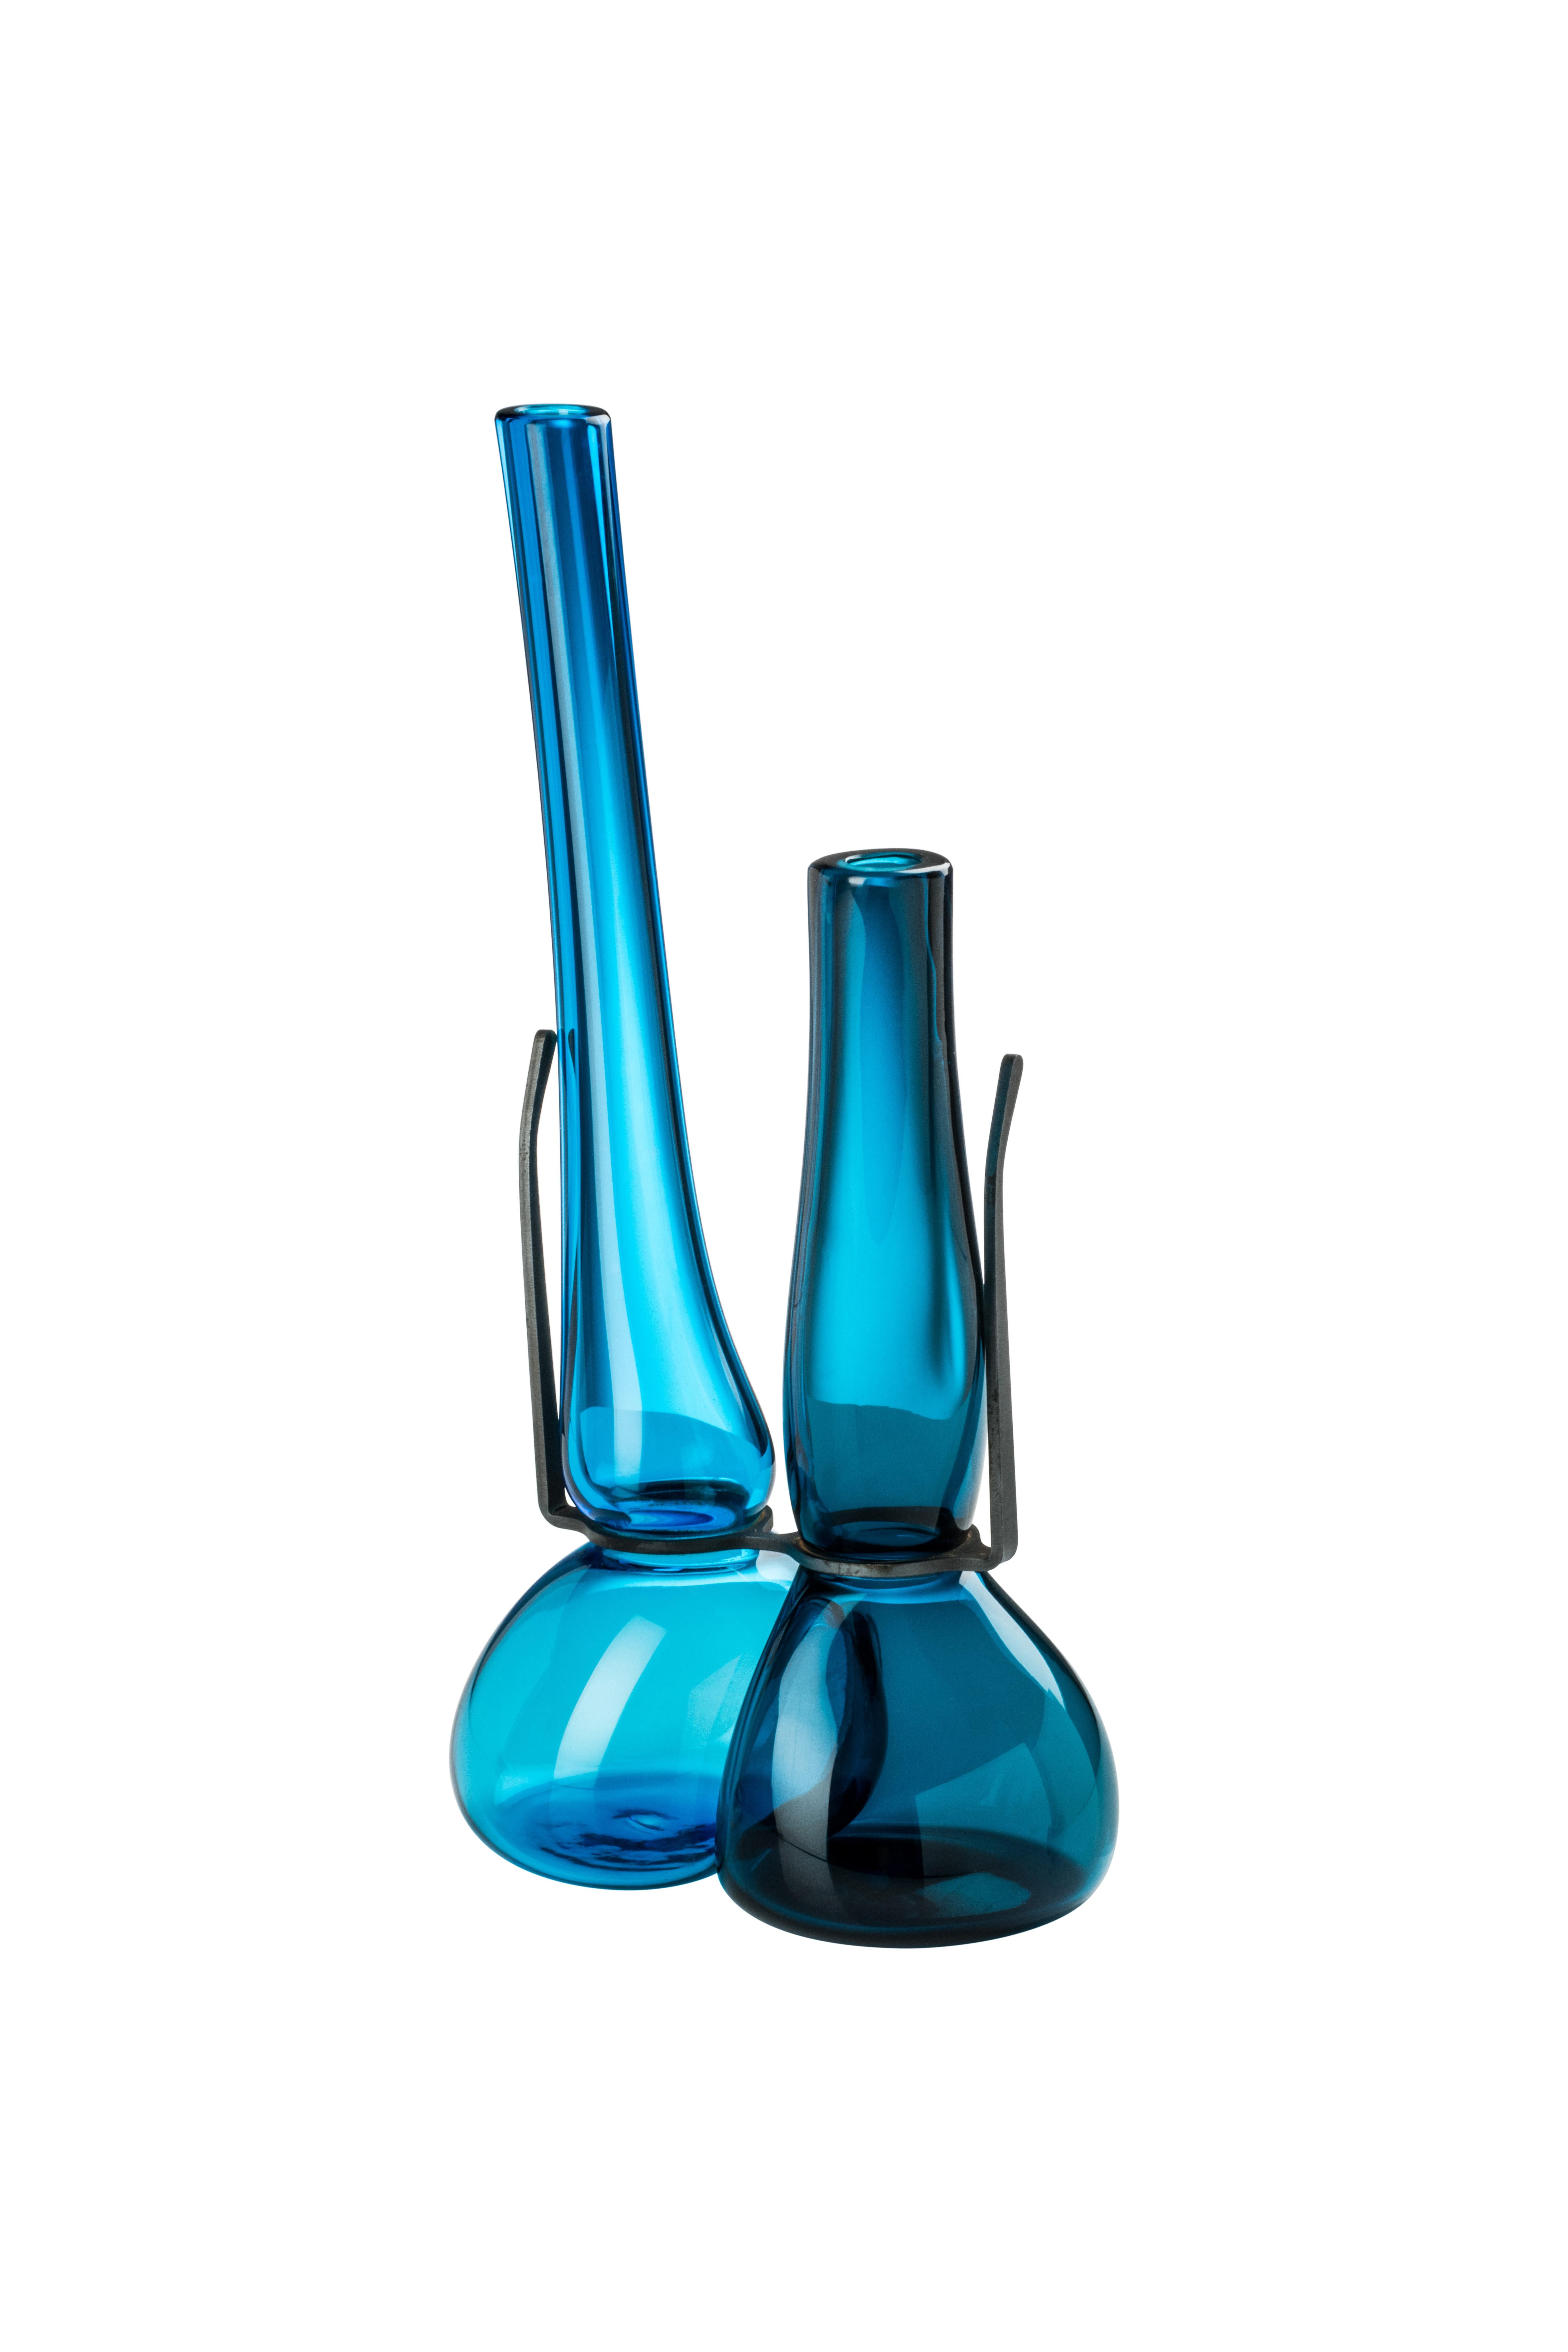 Venini double glass vase in aquamarine and horizon blue designed by Ron Arad in 2018. Perfect for indoor home decor as container or statement piece for any room. Also available in other colors on 1stdibs.

Dimensions: 20 cm diameter x cm height.